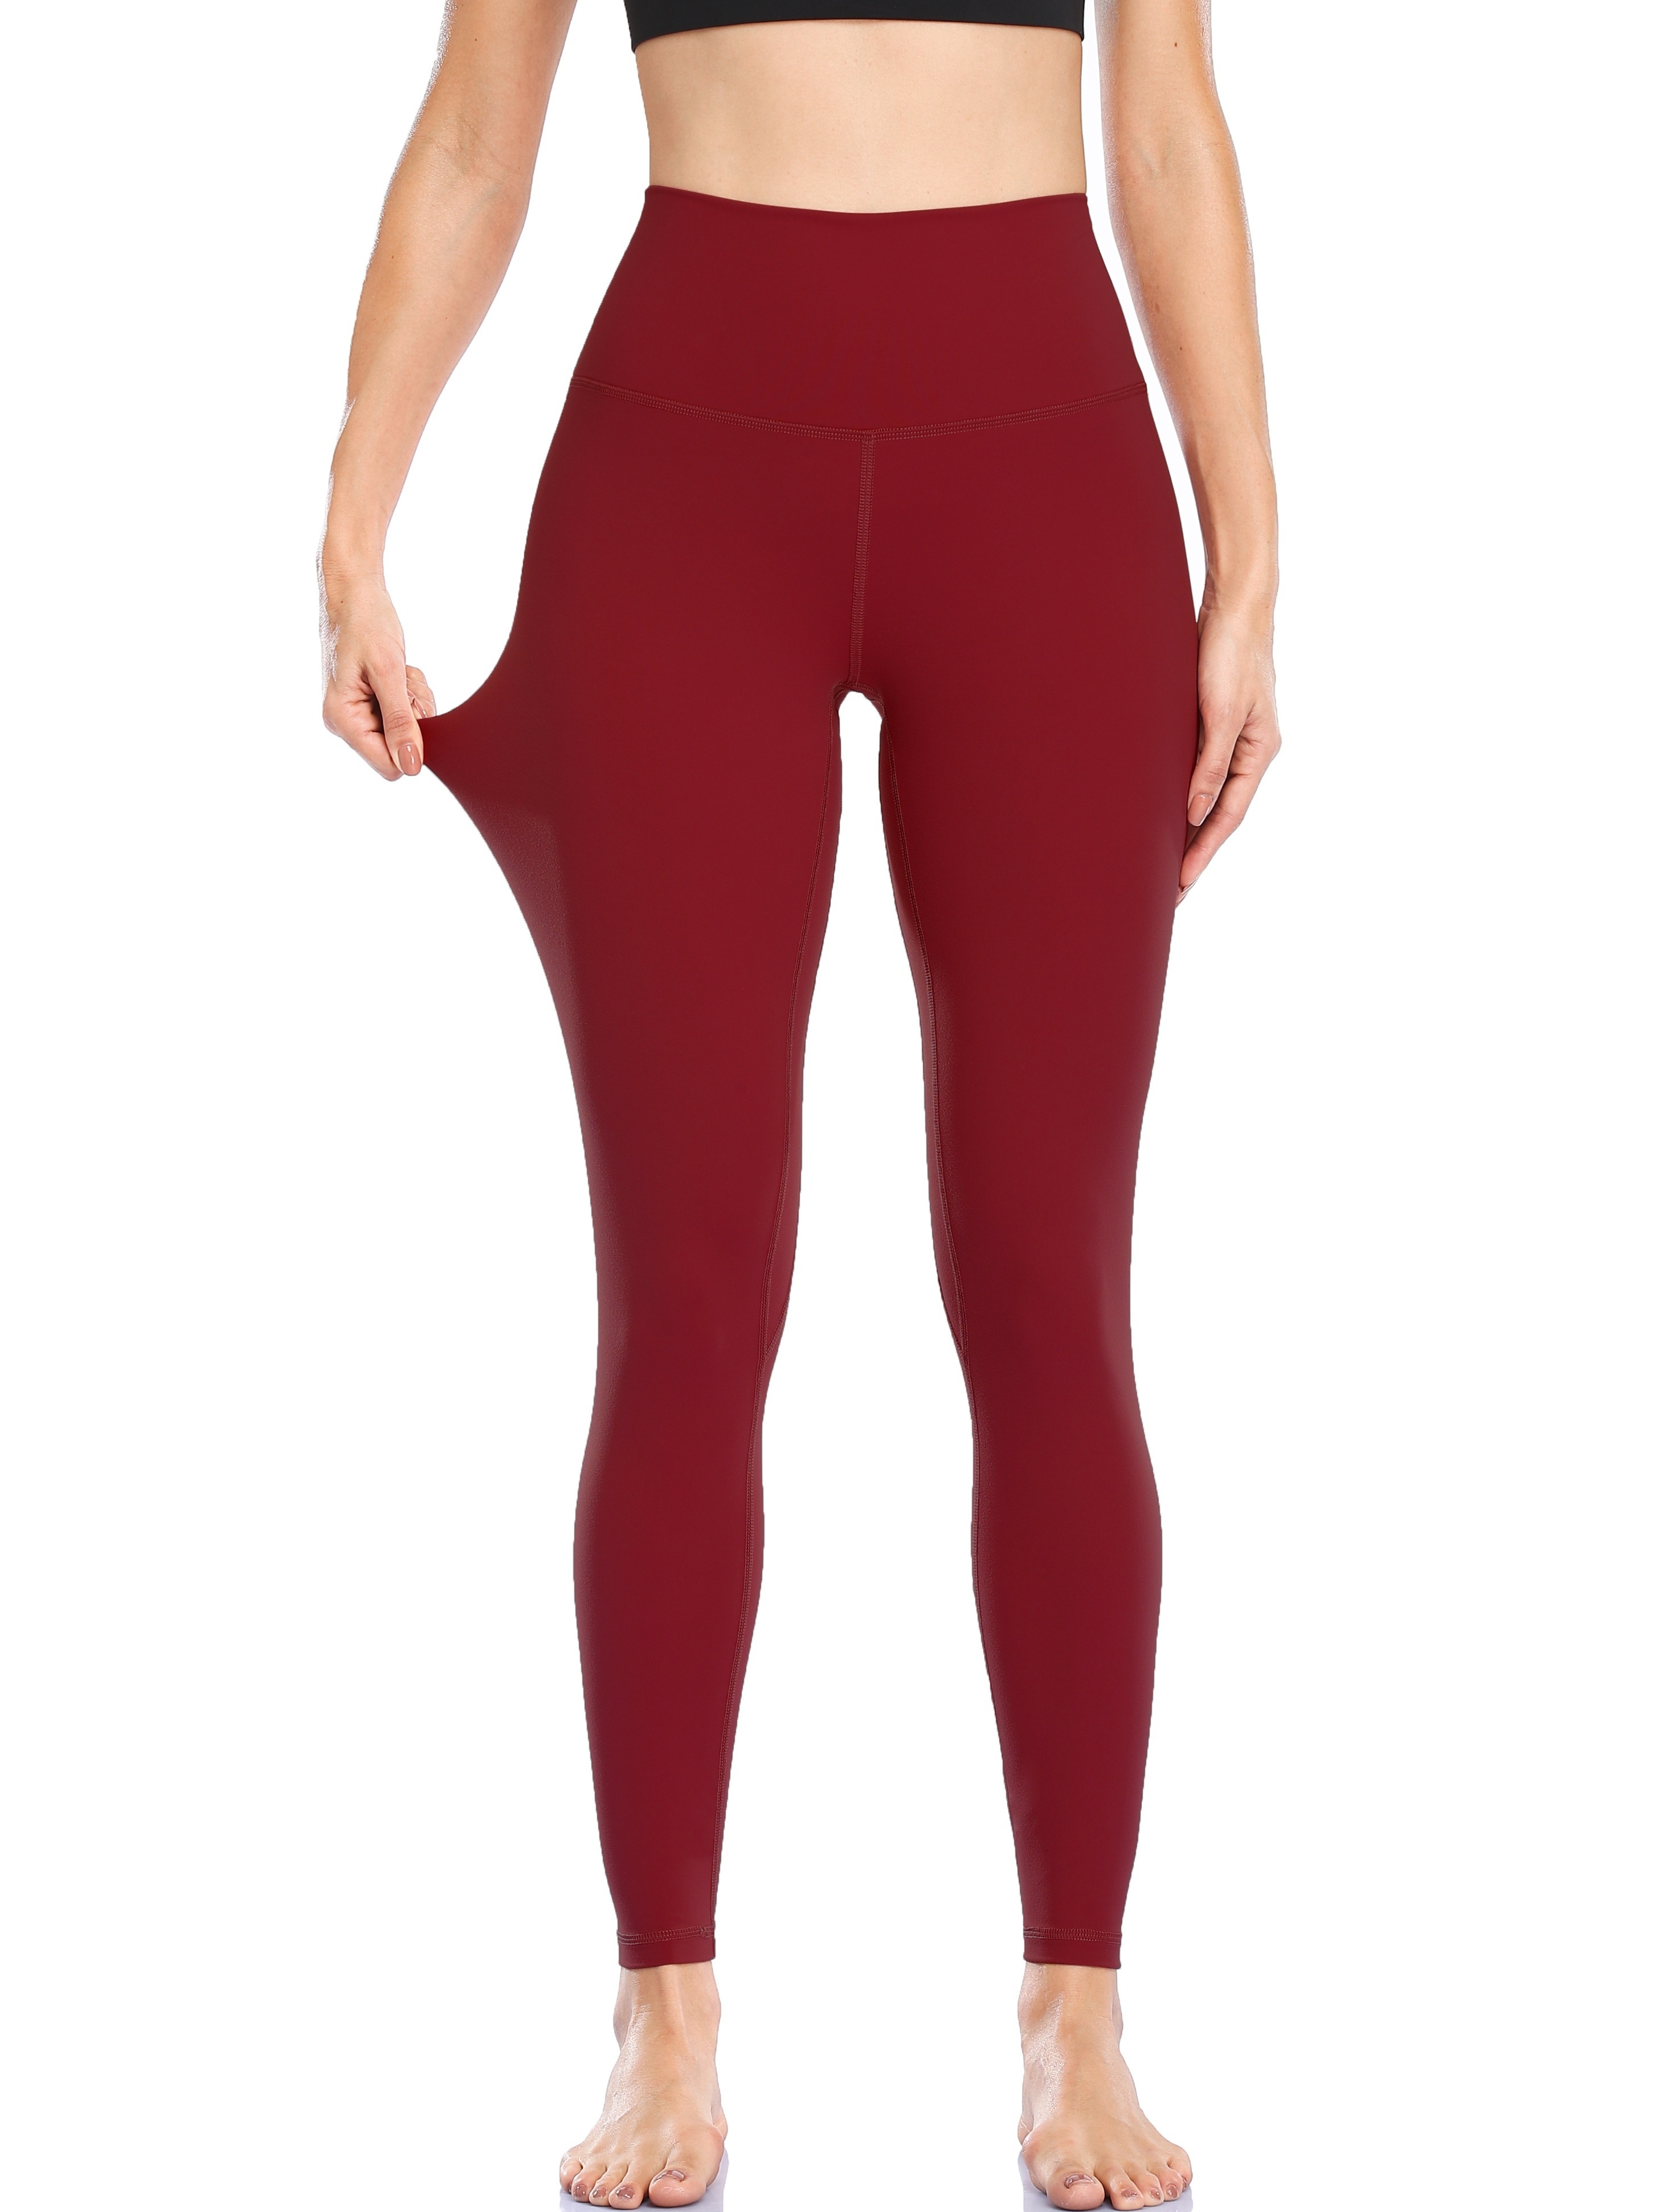 High Waisted Velocity Perform Yoga Solid Red Color Leggings 